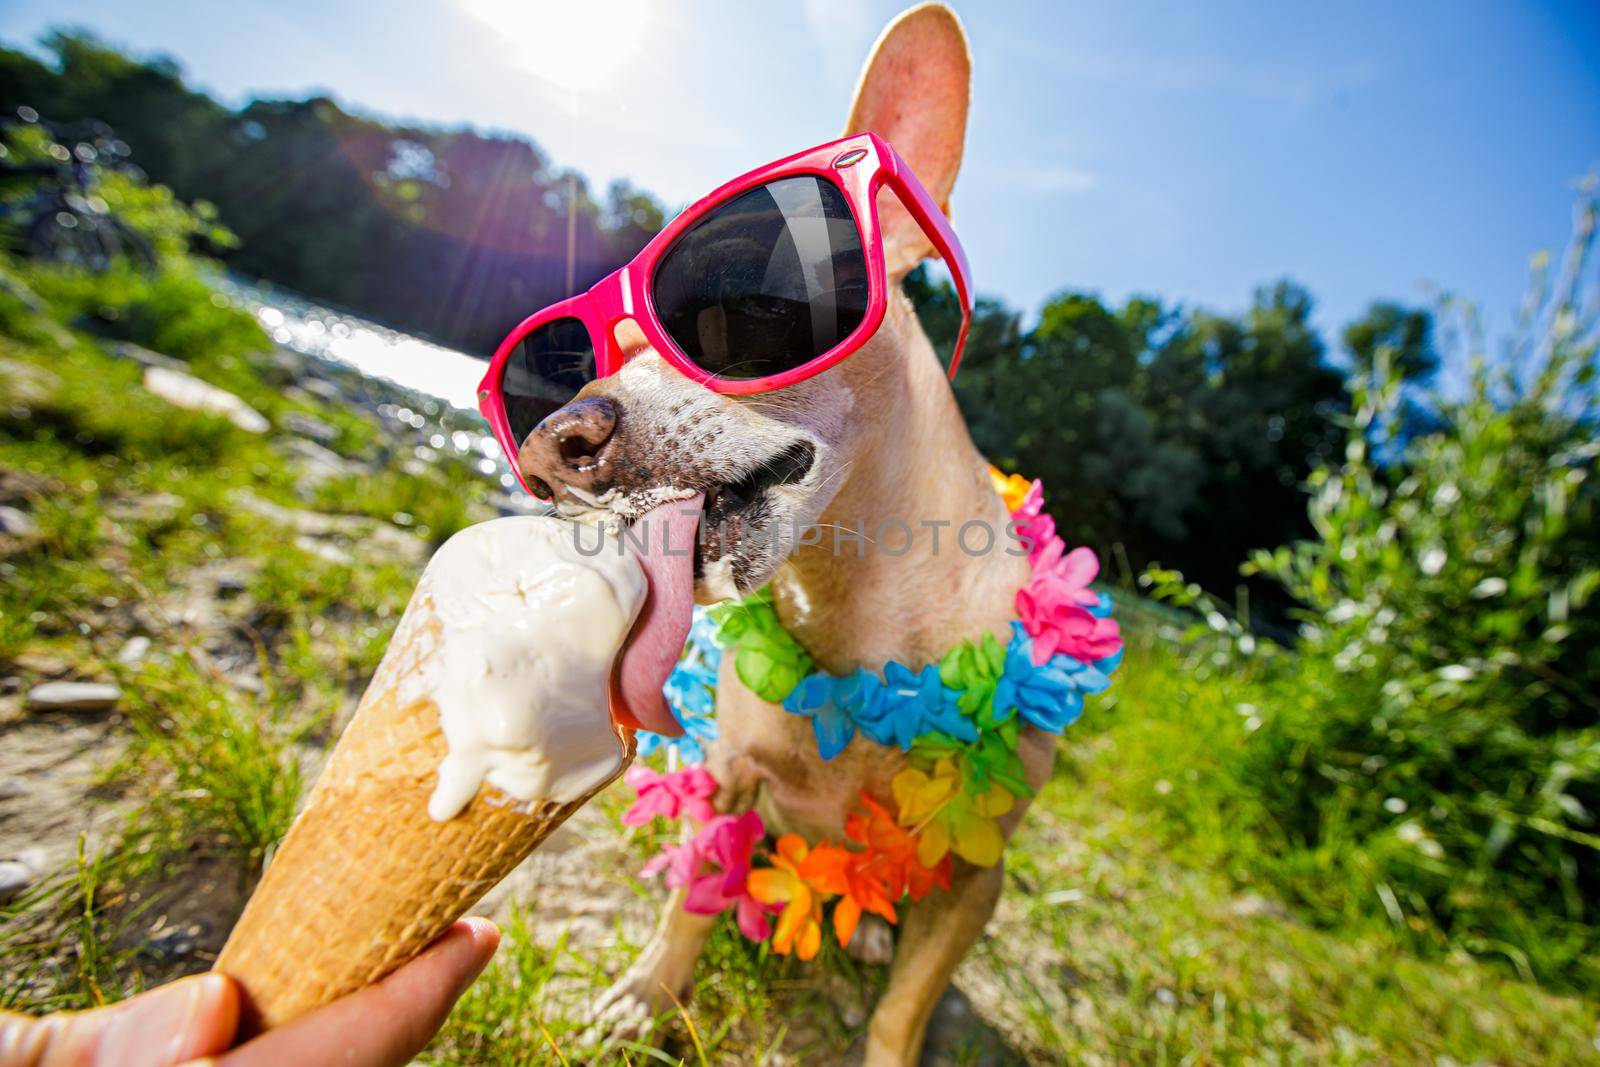 chihuahua  dog on   summer vacation holidays in the city and the beach and river   eating and licking   vanilla ice cream in cone waffle